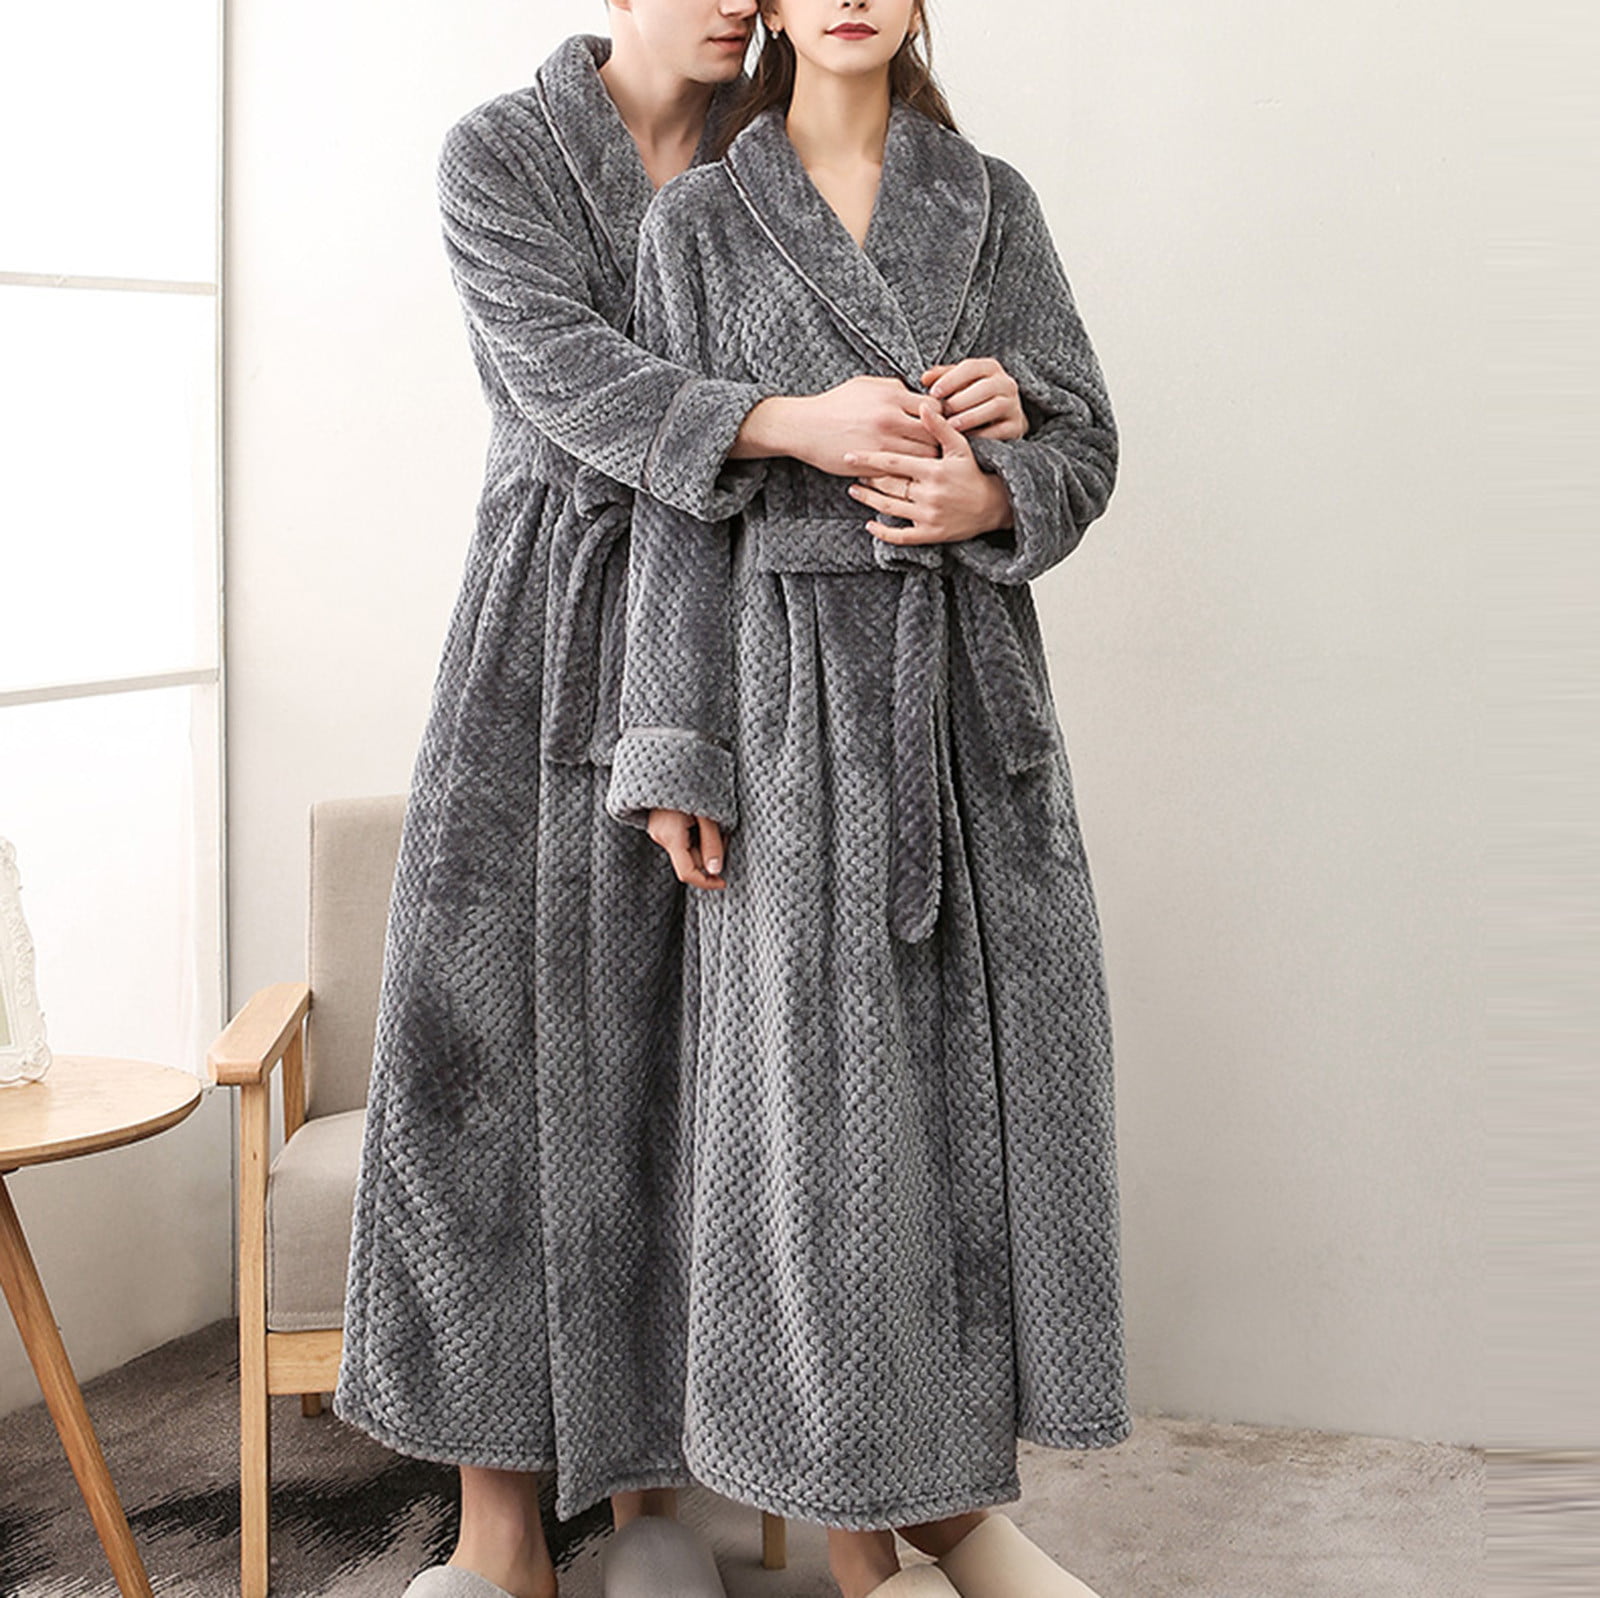 Winter Bathrobe For Couple For Women And Men Soft Flannel, Double Collar,  Thicken Warm, Plus Size, Floor Length Dressing Gown From Purpleboom, $74.94  | DHgate.Com